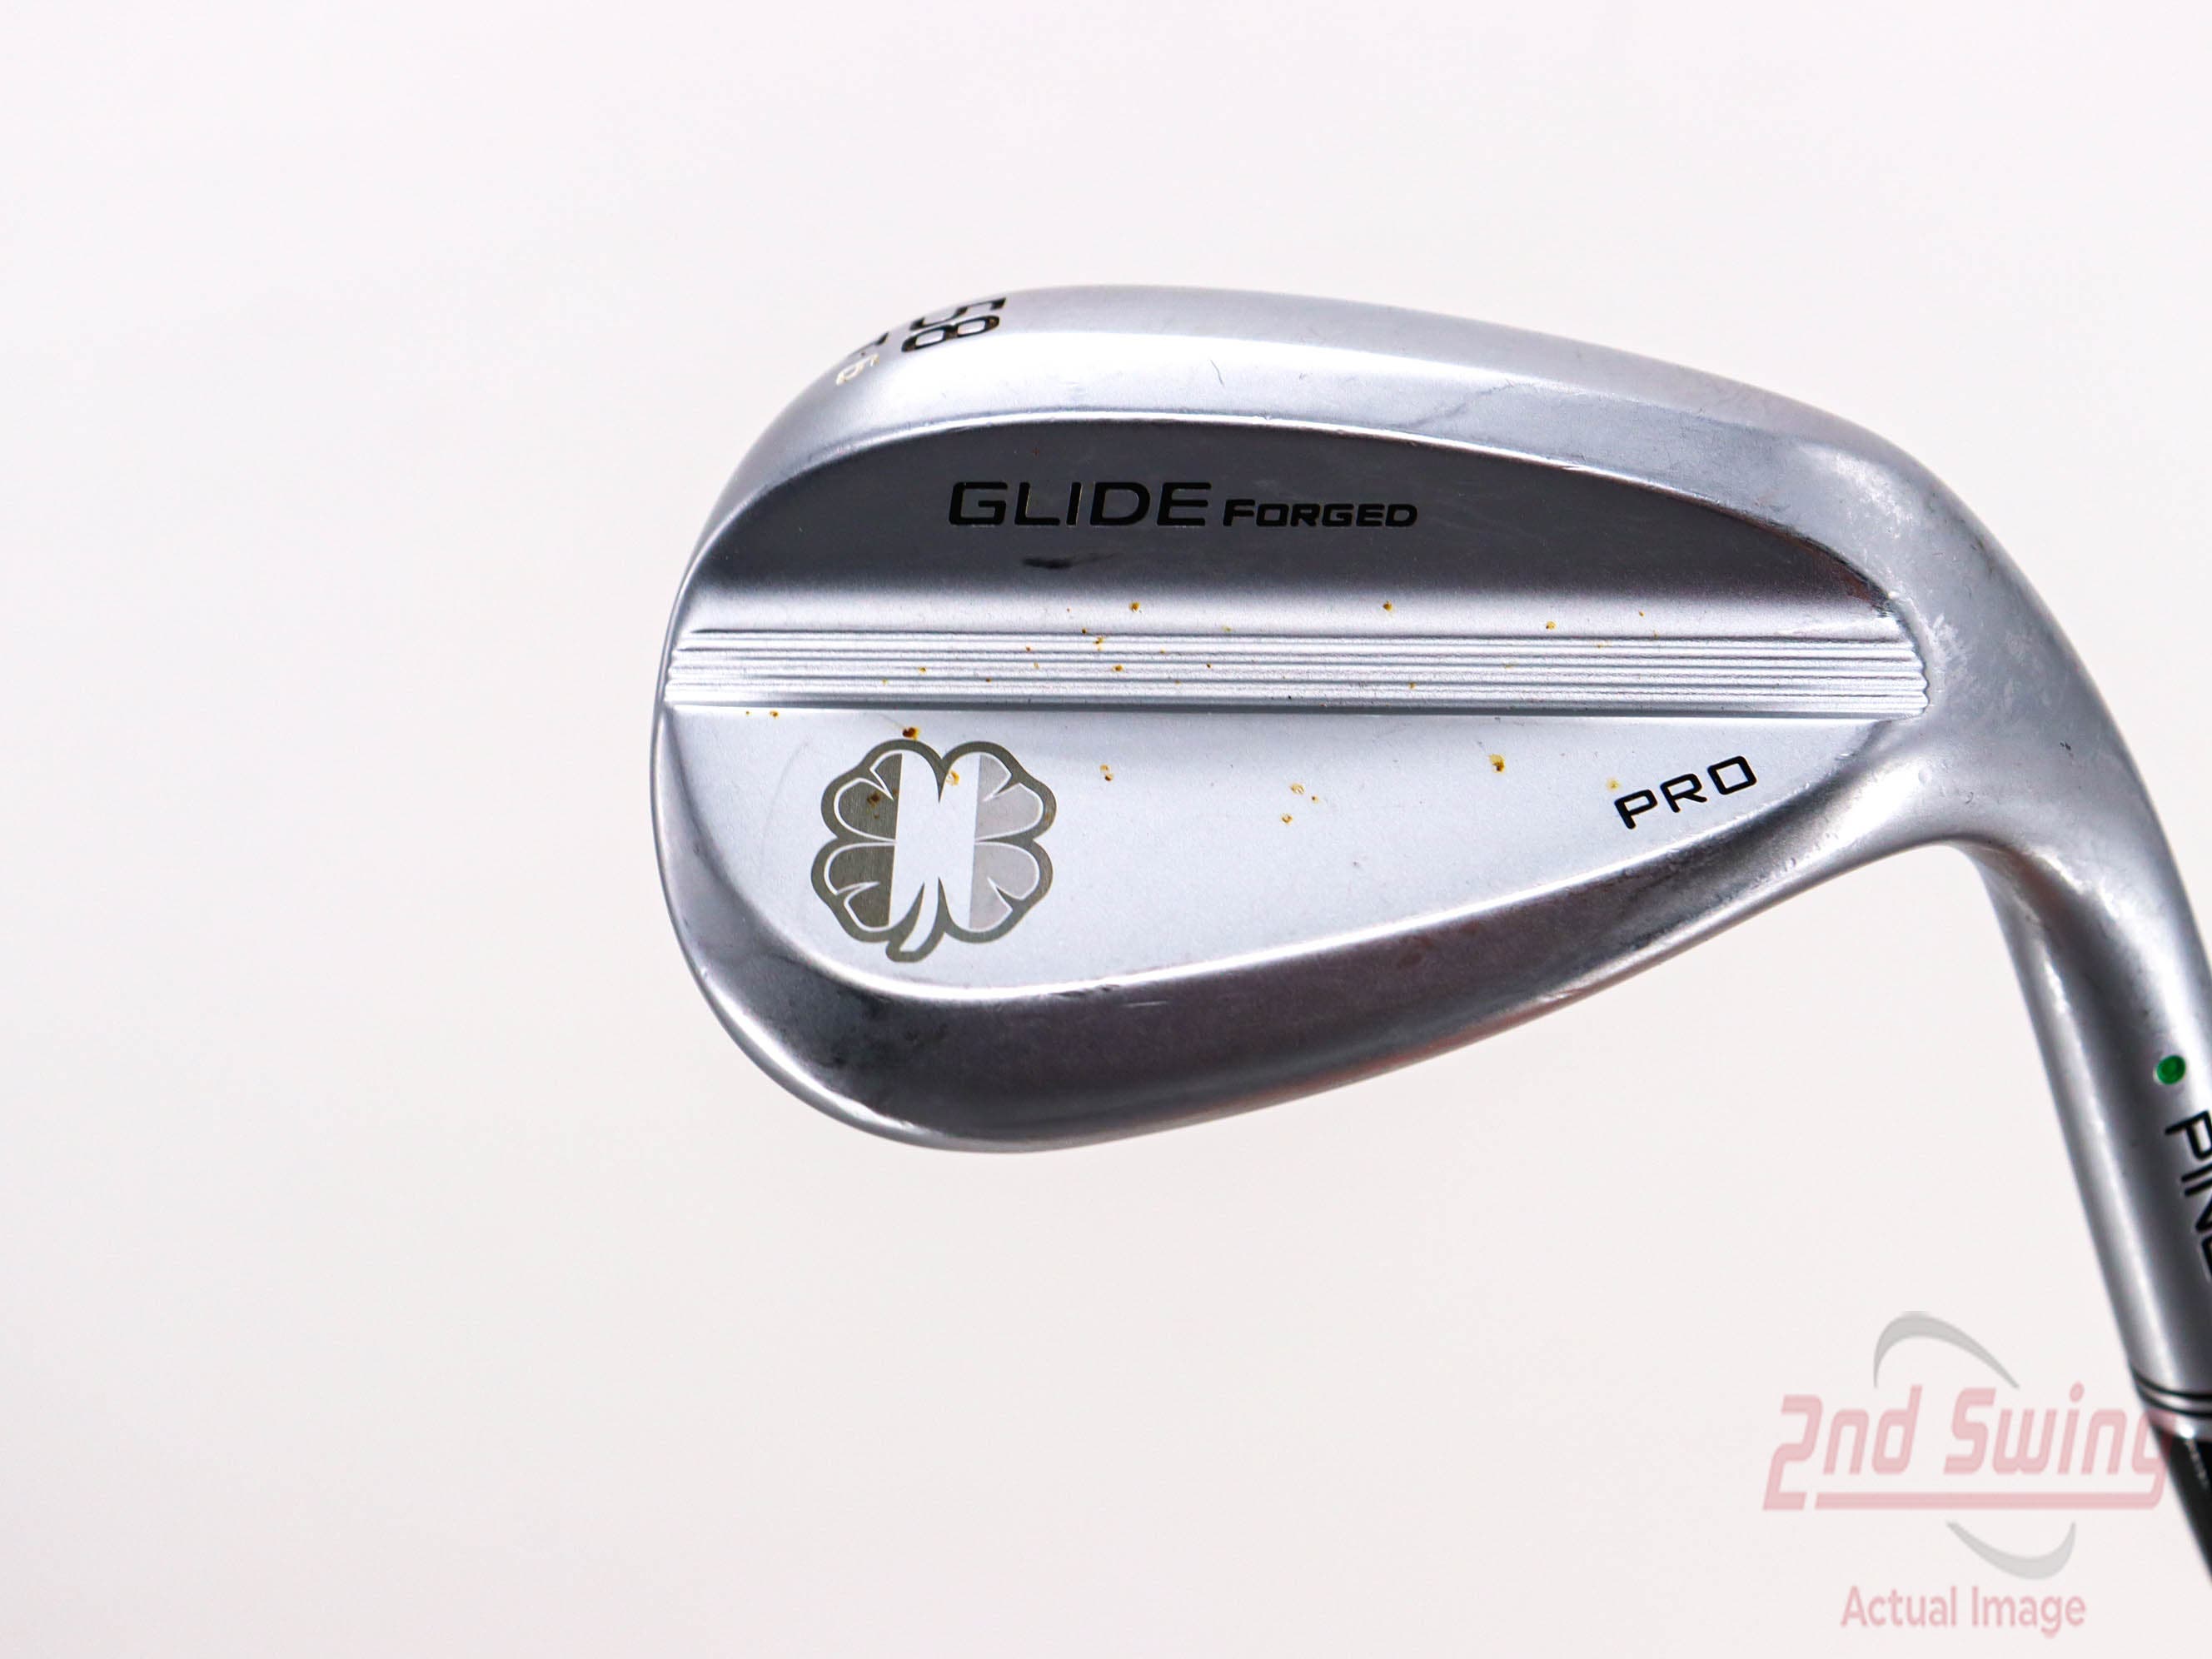 Ping Glide Forged Pro Wedge | 2nd Swing Golf